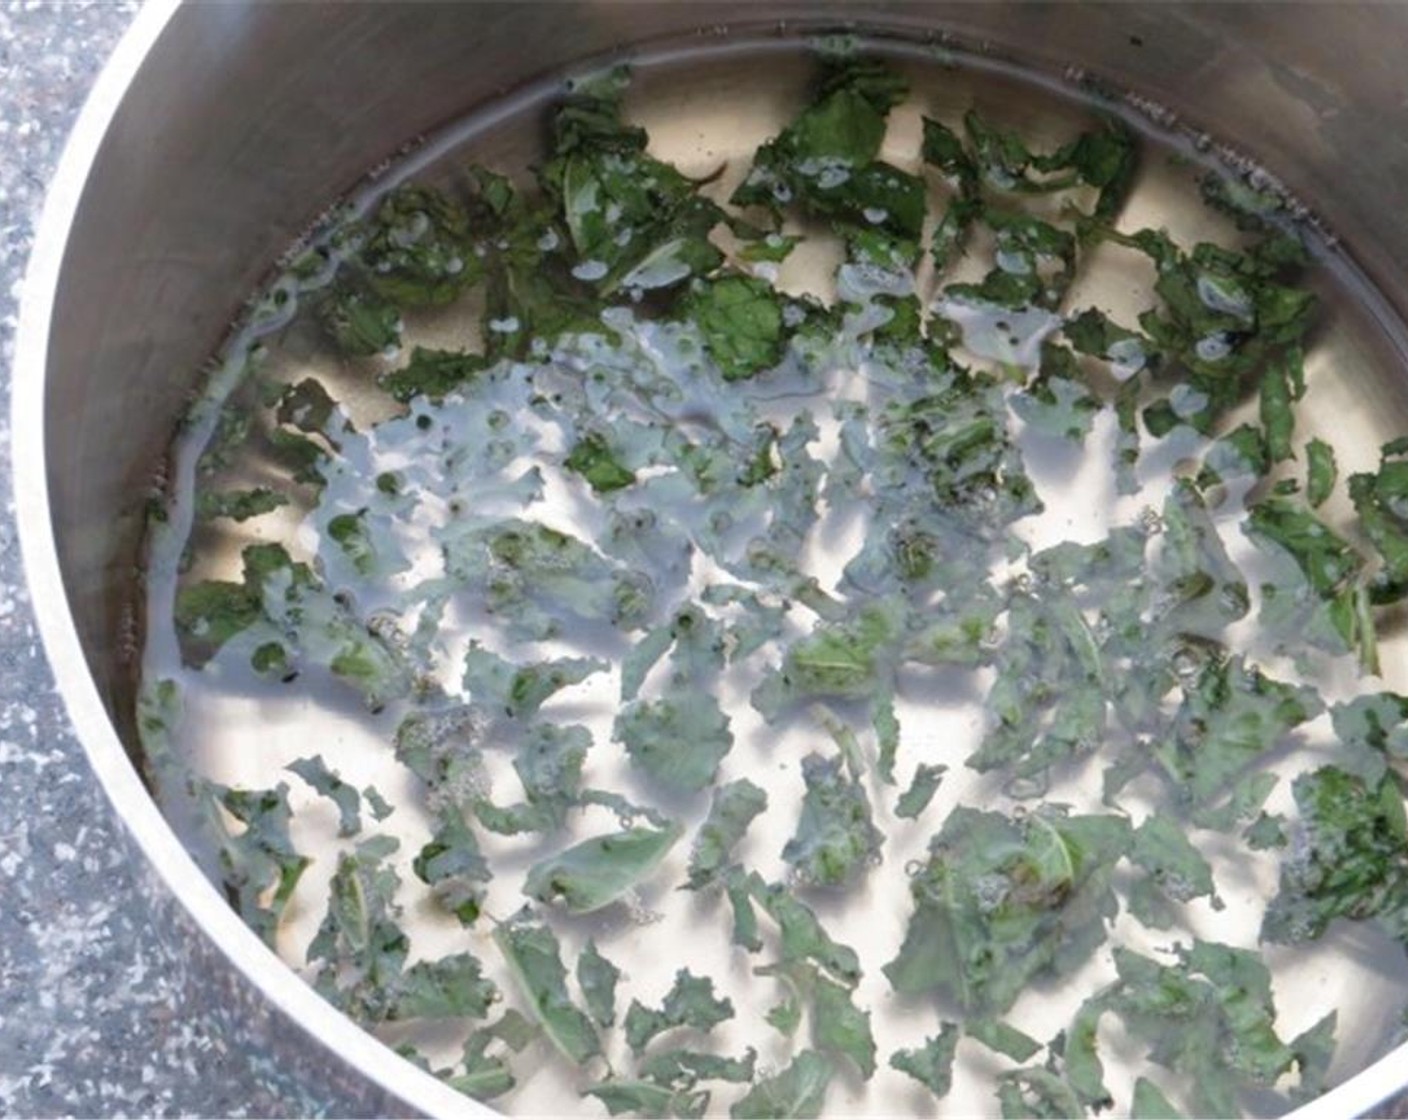 step 1 In a small saucepan over medium high heat, combine Granulated Sugar (1/2 cup), Water (1/2 cup), and the Fresh Mint Leaves (1/2 cup) stirring occasionally until sugar is dissolved. Remove from heat. Let steep for 10 minutes. Strain mint leaves from syrup. Discard.